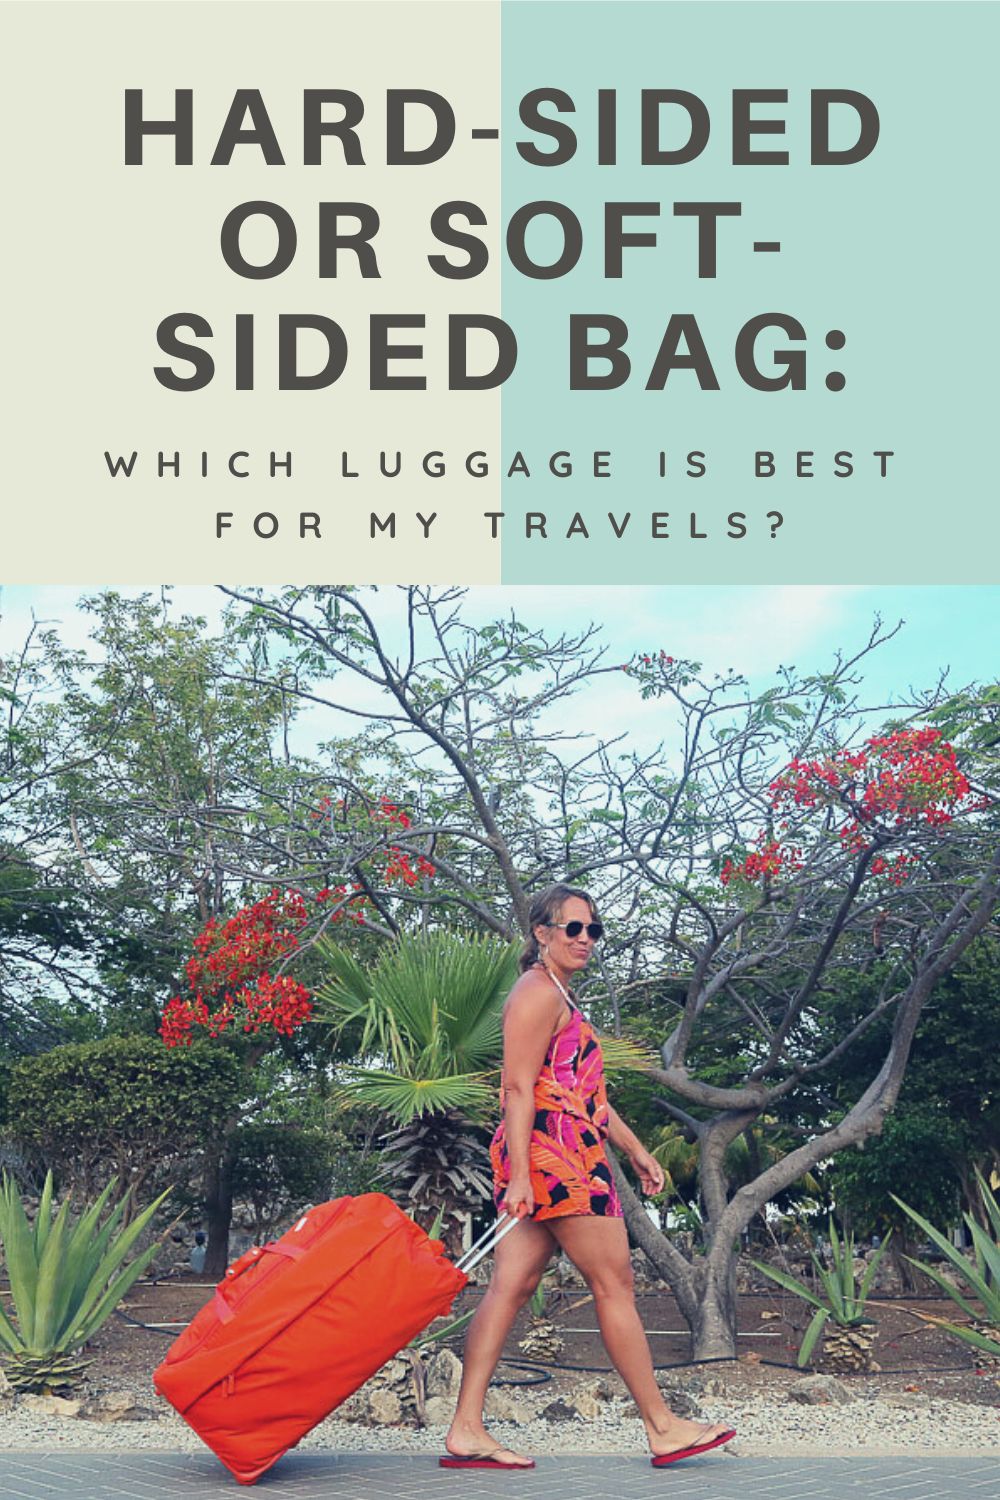 Which Luggage is Best: Hard-Sided or Soft-Sided?